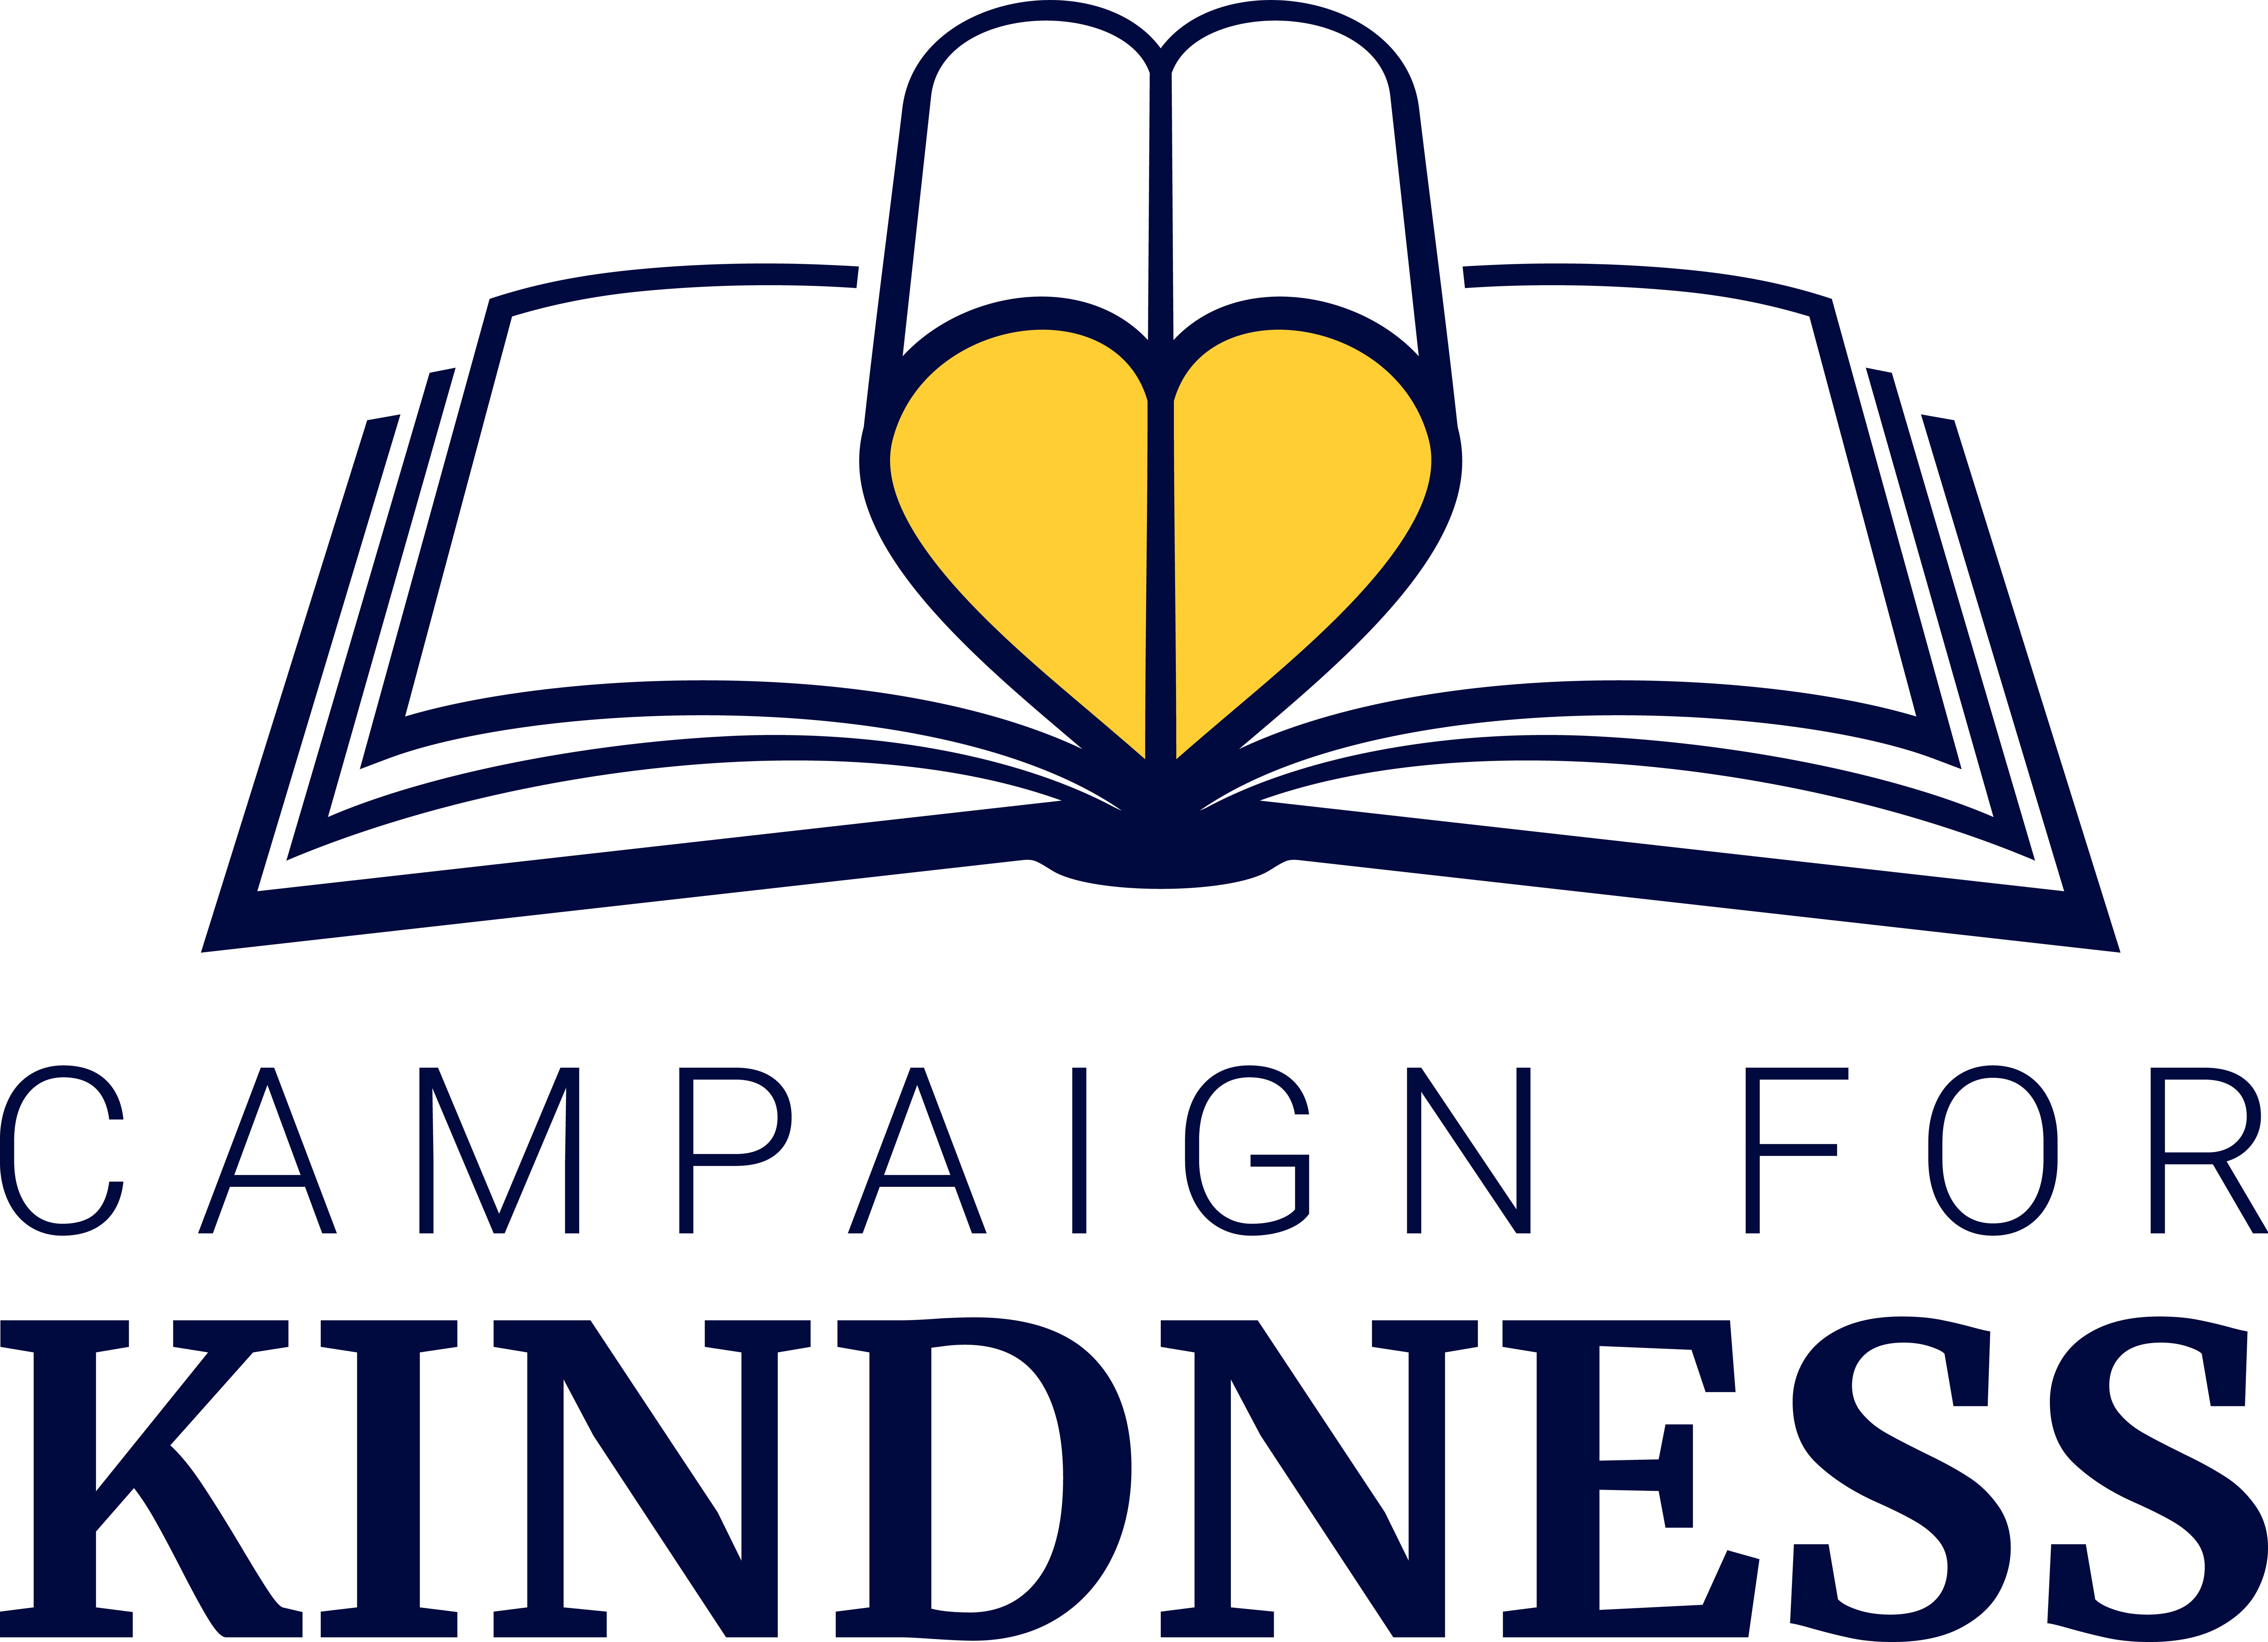 Campaign for Kindness logo